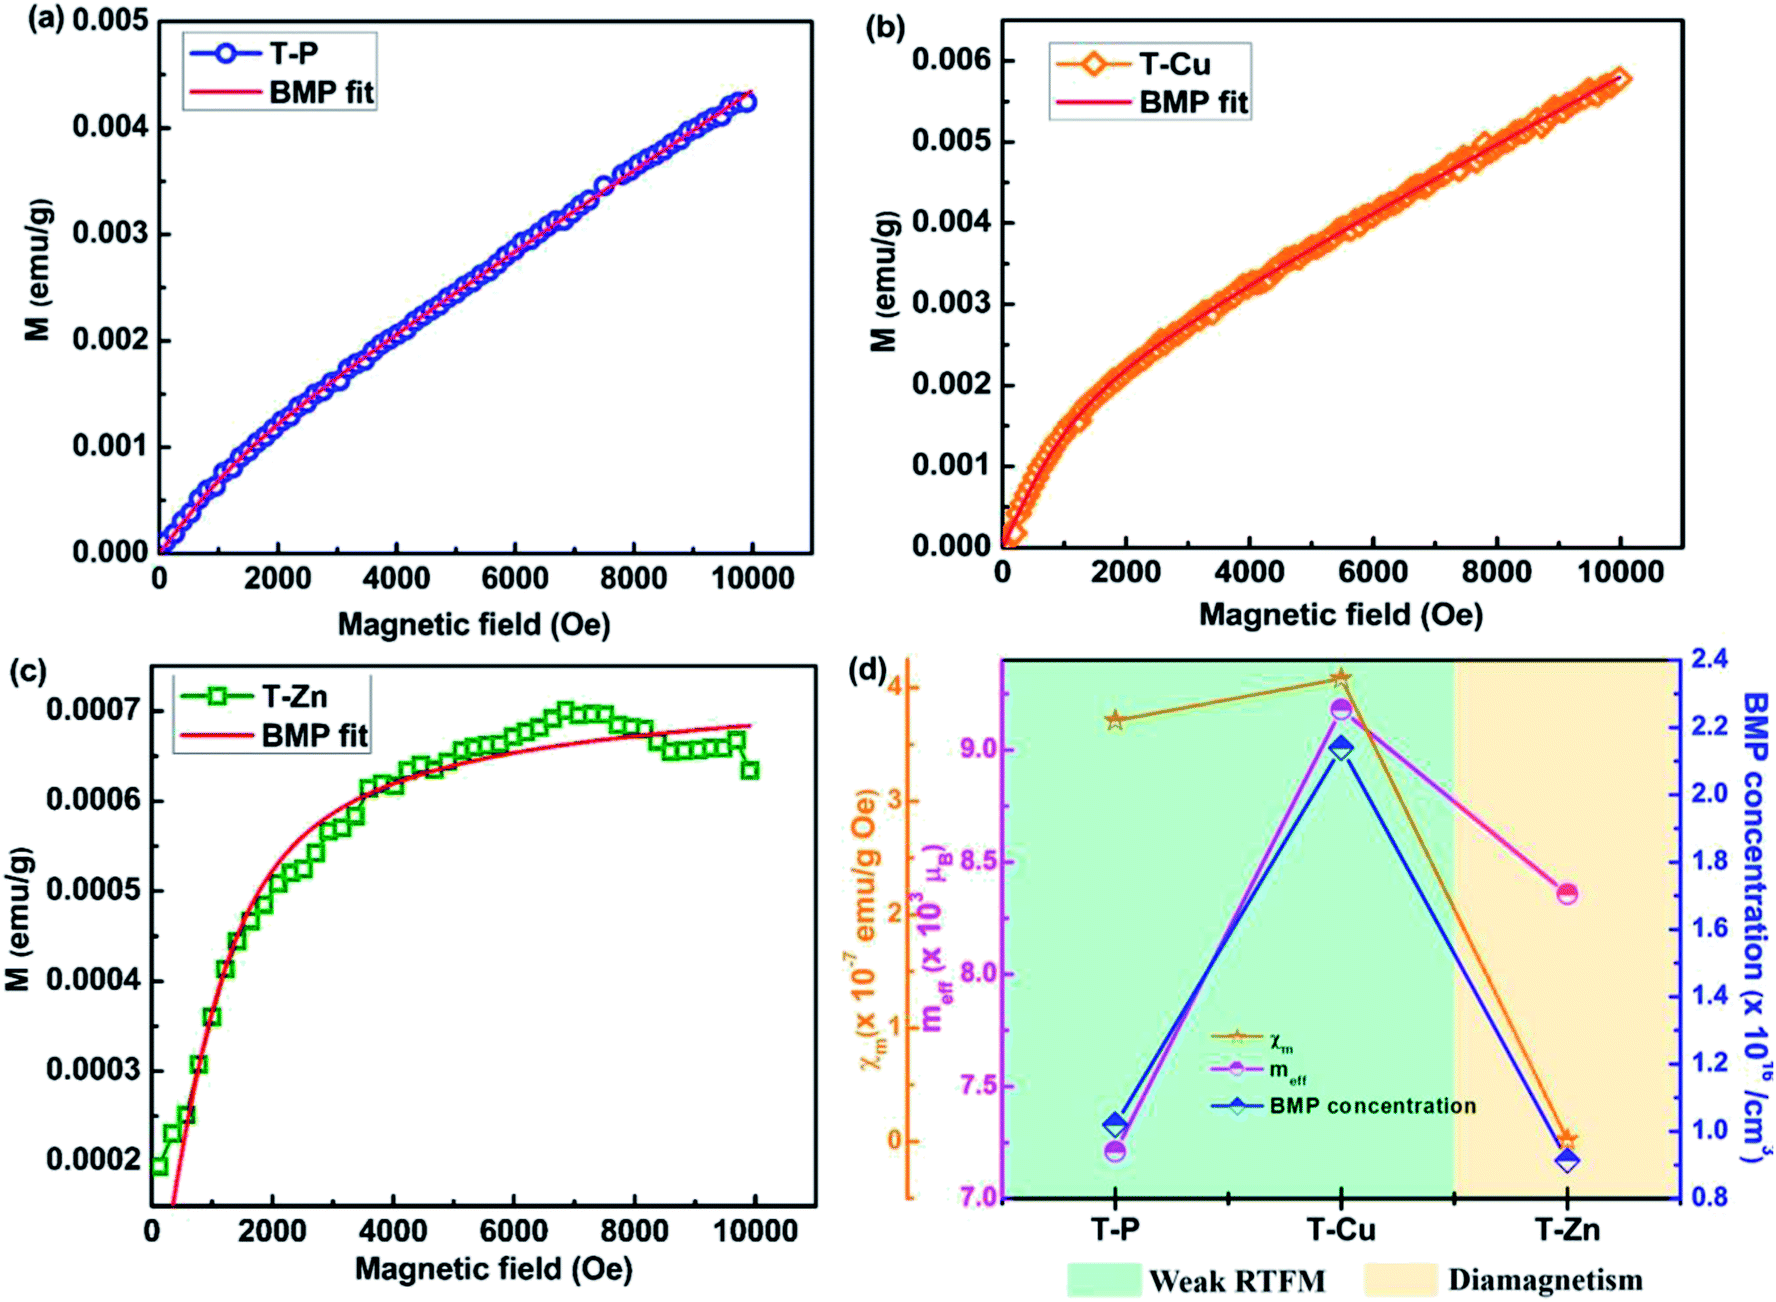 Defect Mediated Mechanism In Undoped Cu And Zn Doped Tio 2 Nanocrystals For Tailoring The Band Gap And Magnetic Properties Rsc Advances Rsc Publishing Doi 10 1039 C8raf